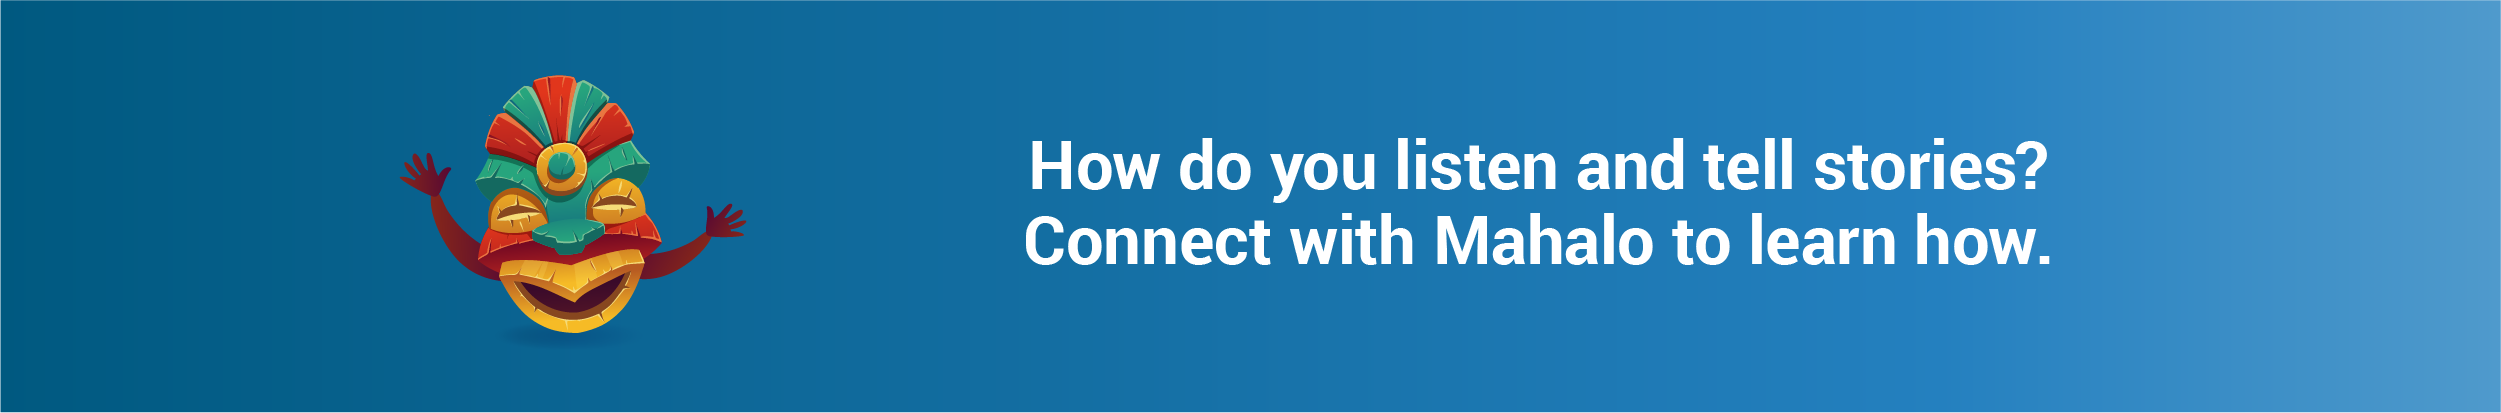 How do you listen and tell stories? Connect with Mahalo and learn how